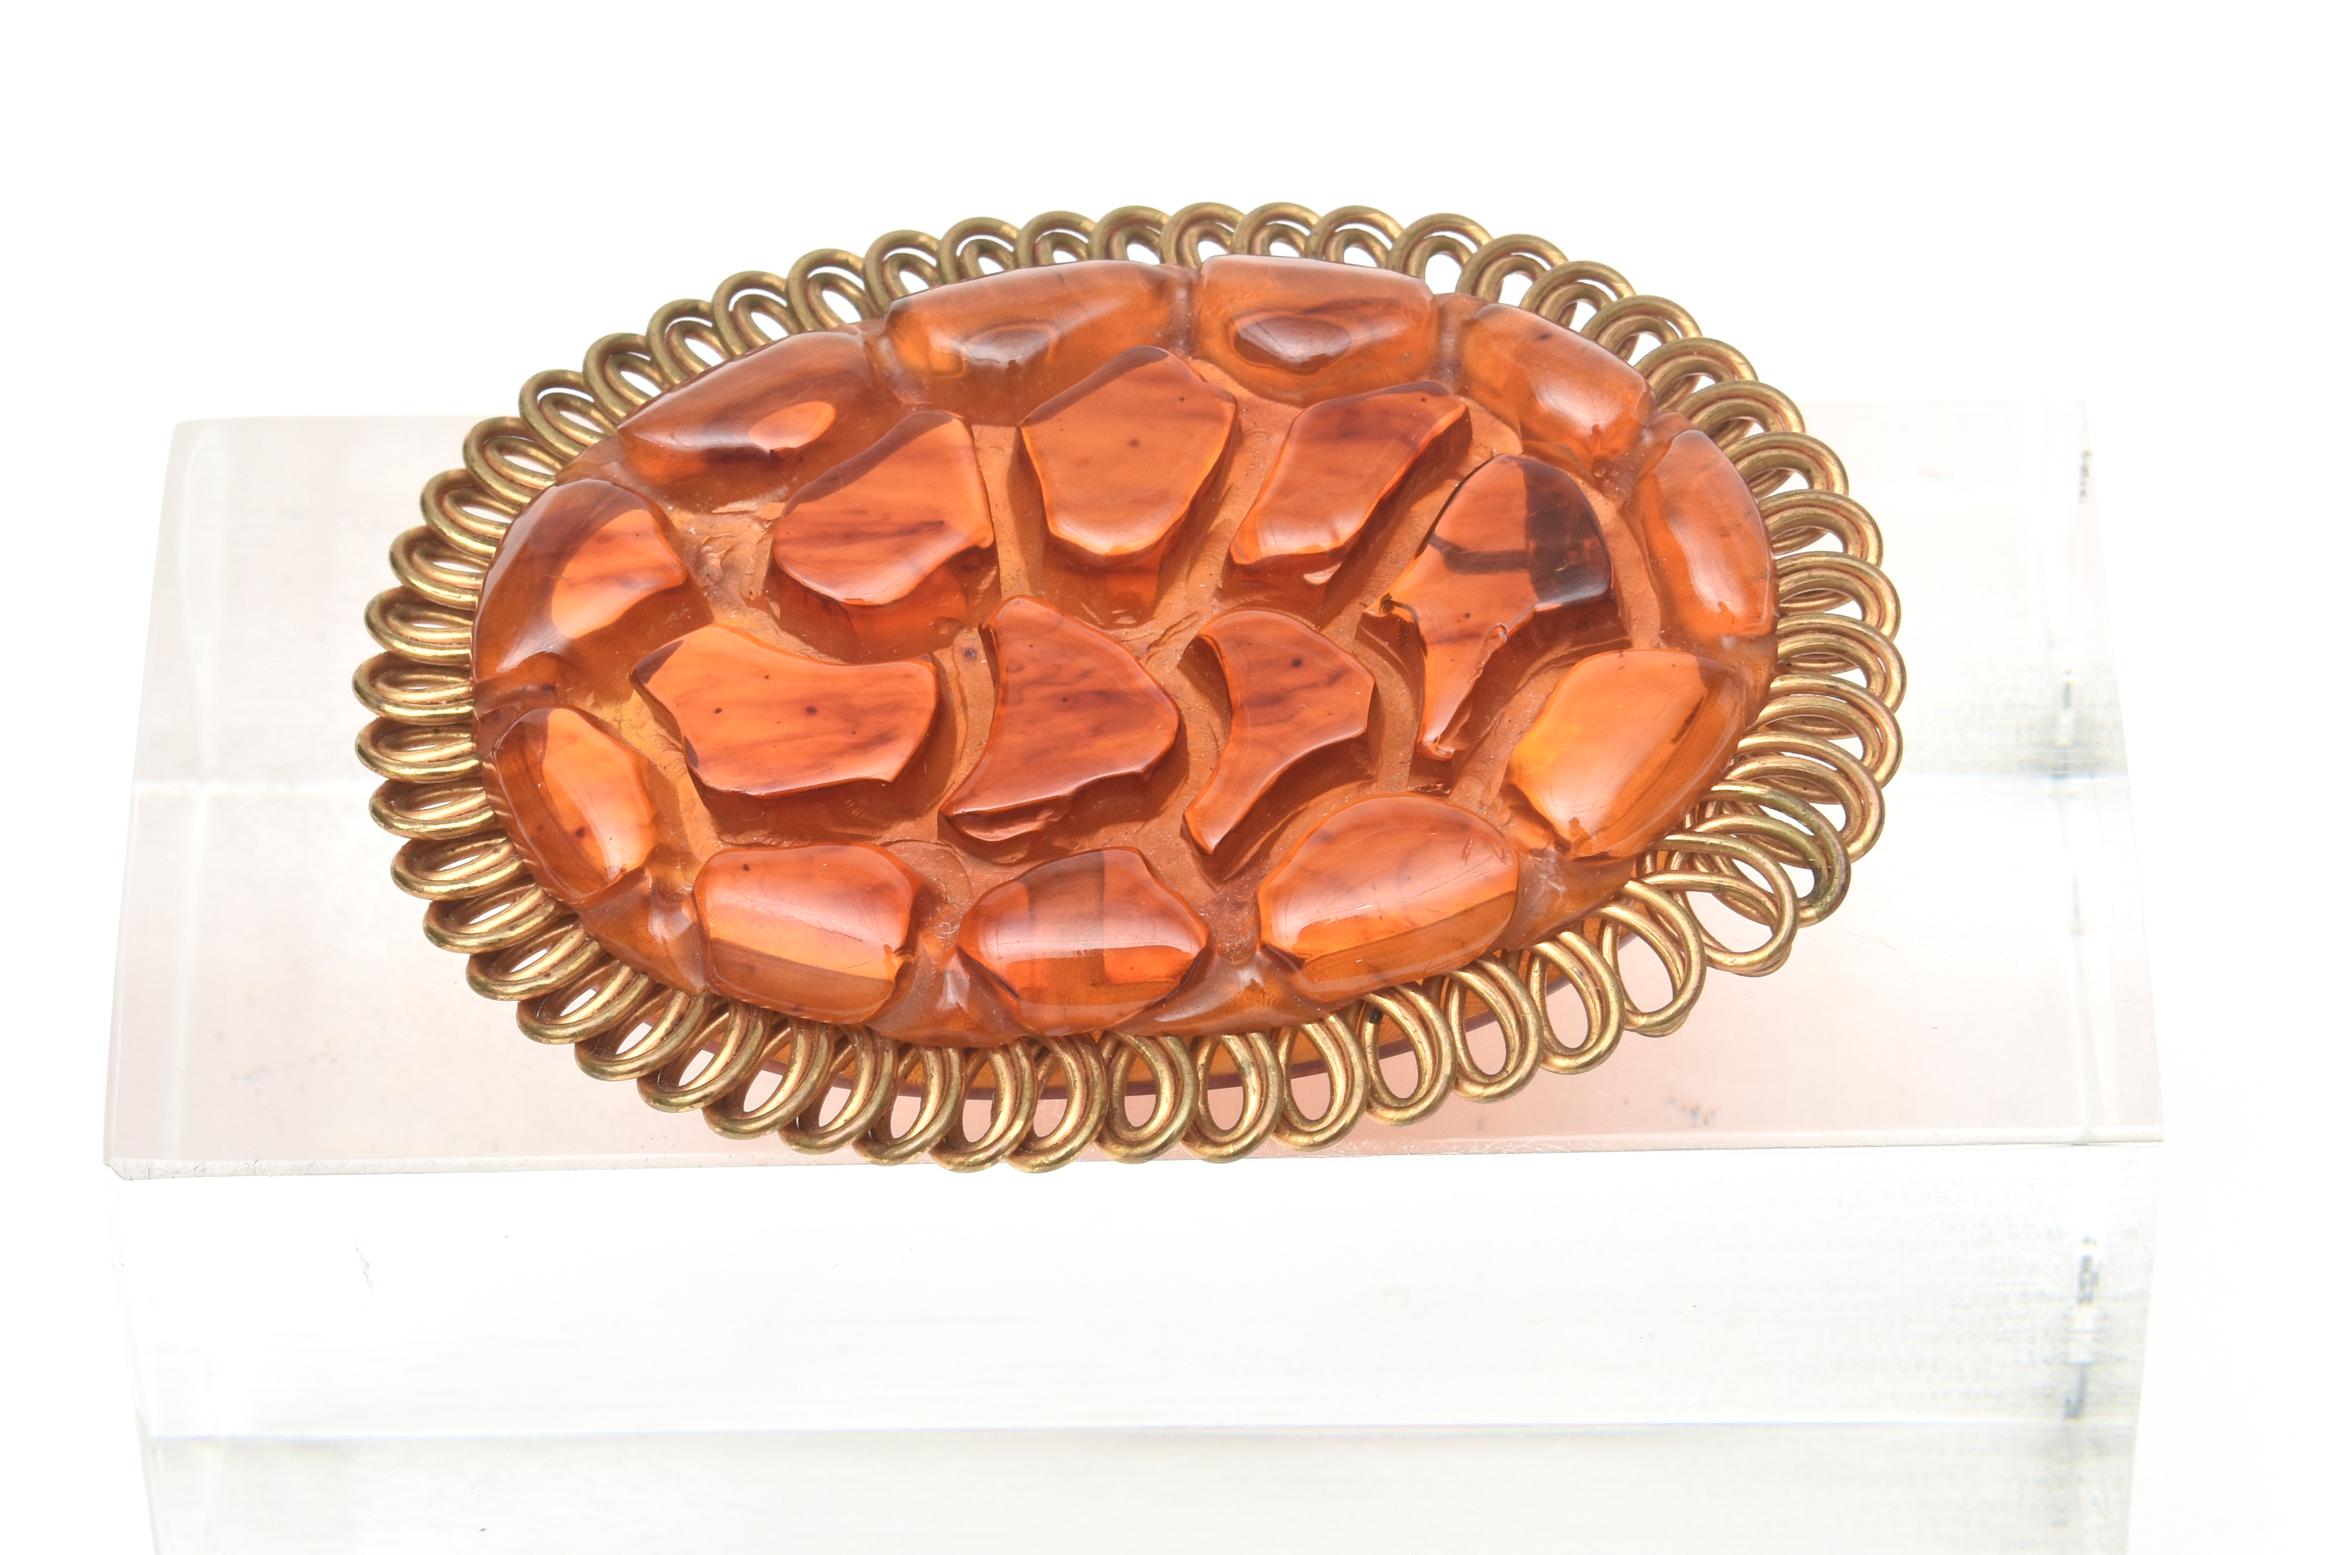 This fabulous carved art deco bakelite and brass trimmed oval pin brooch will make any outfit sing. The brass is overlapping loops as the exterior.
This is not a common bakelite pin. The color of the bakelite has beautiful tones of orange amber